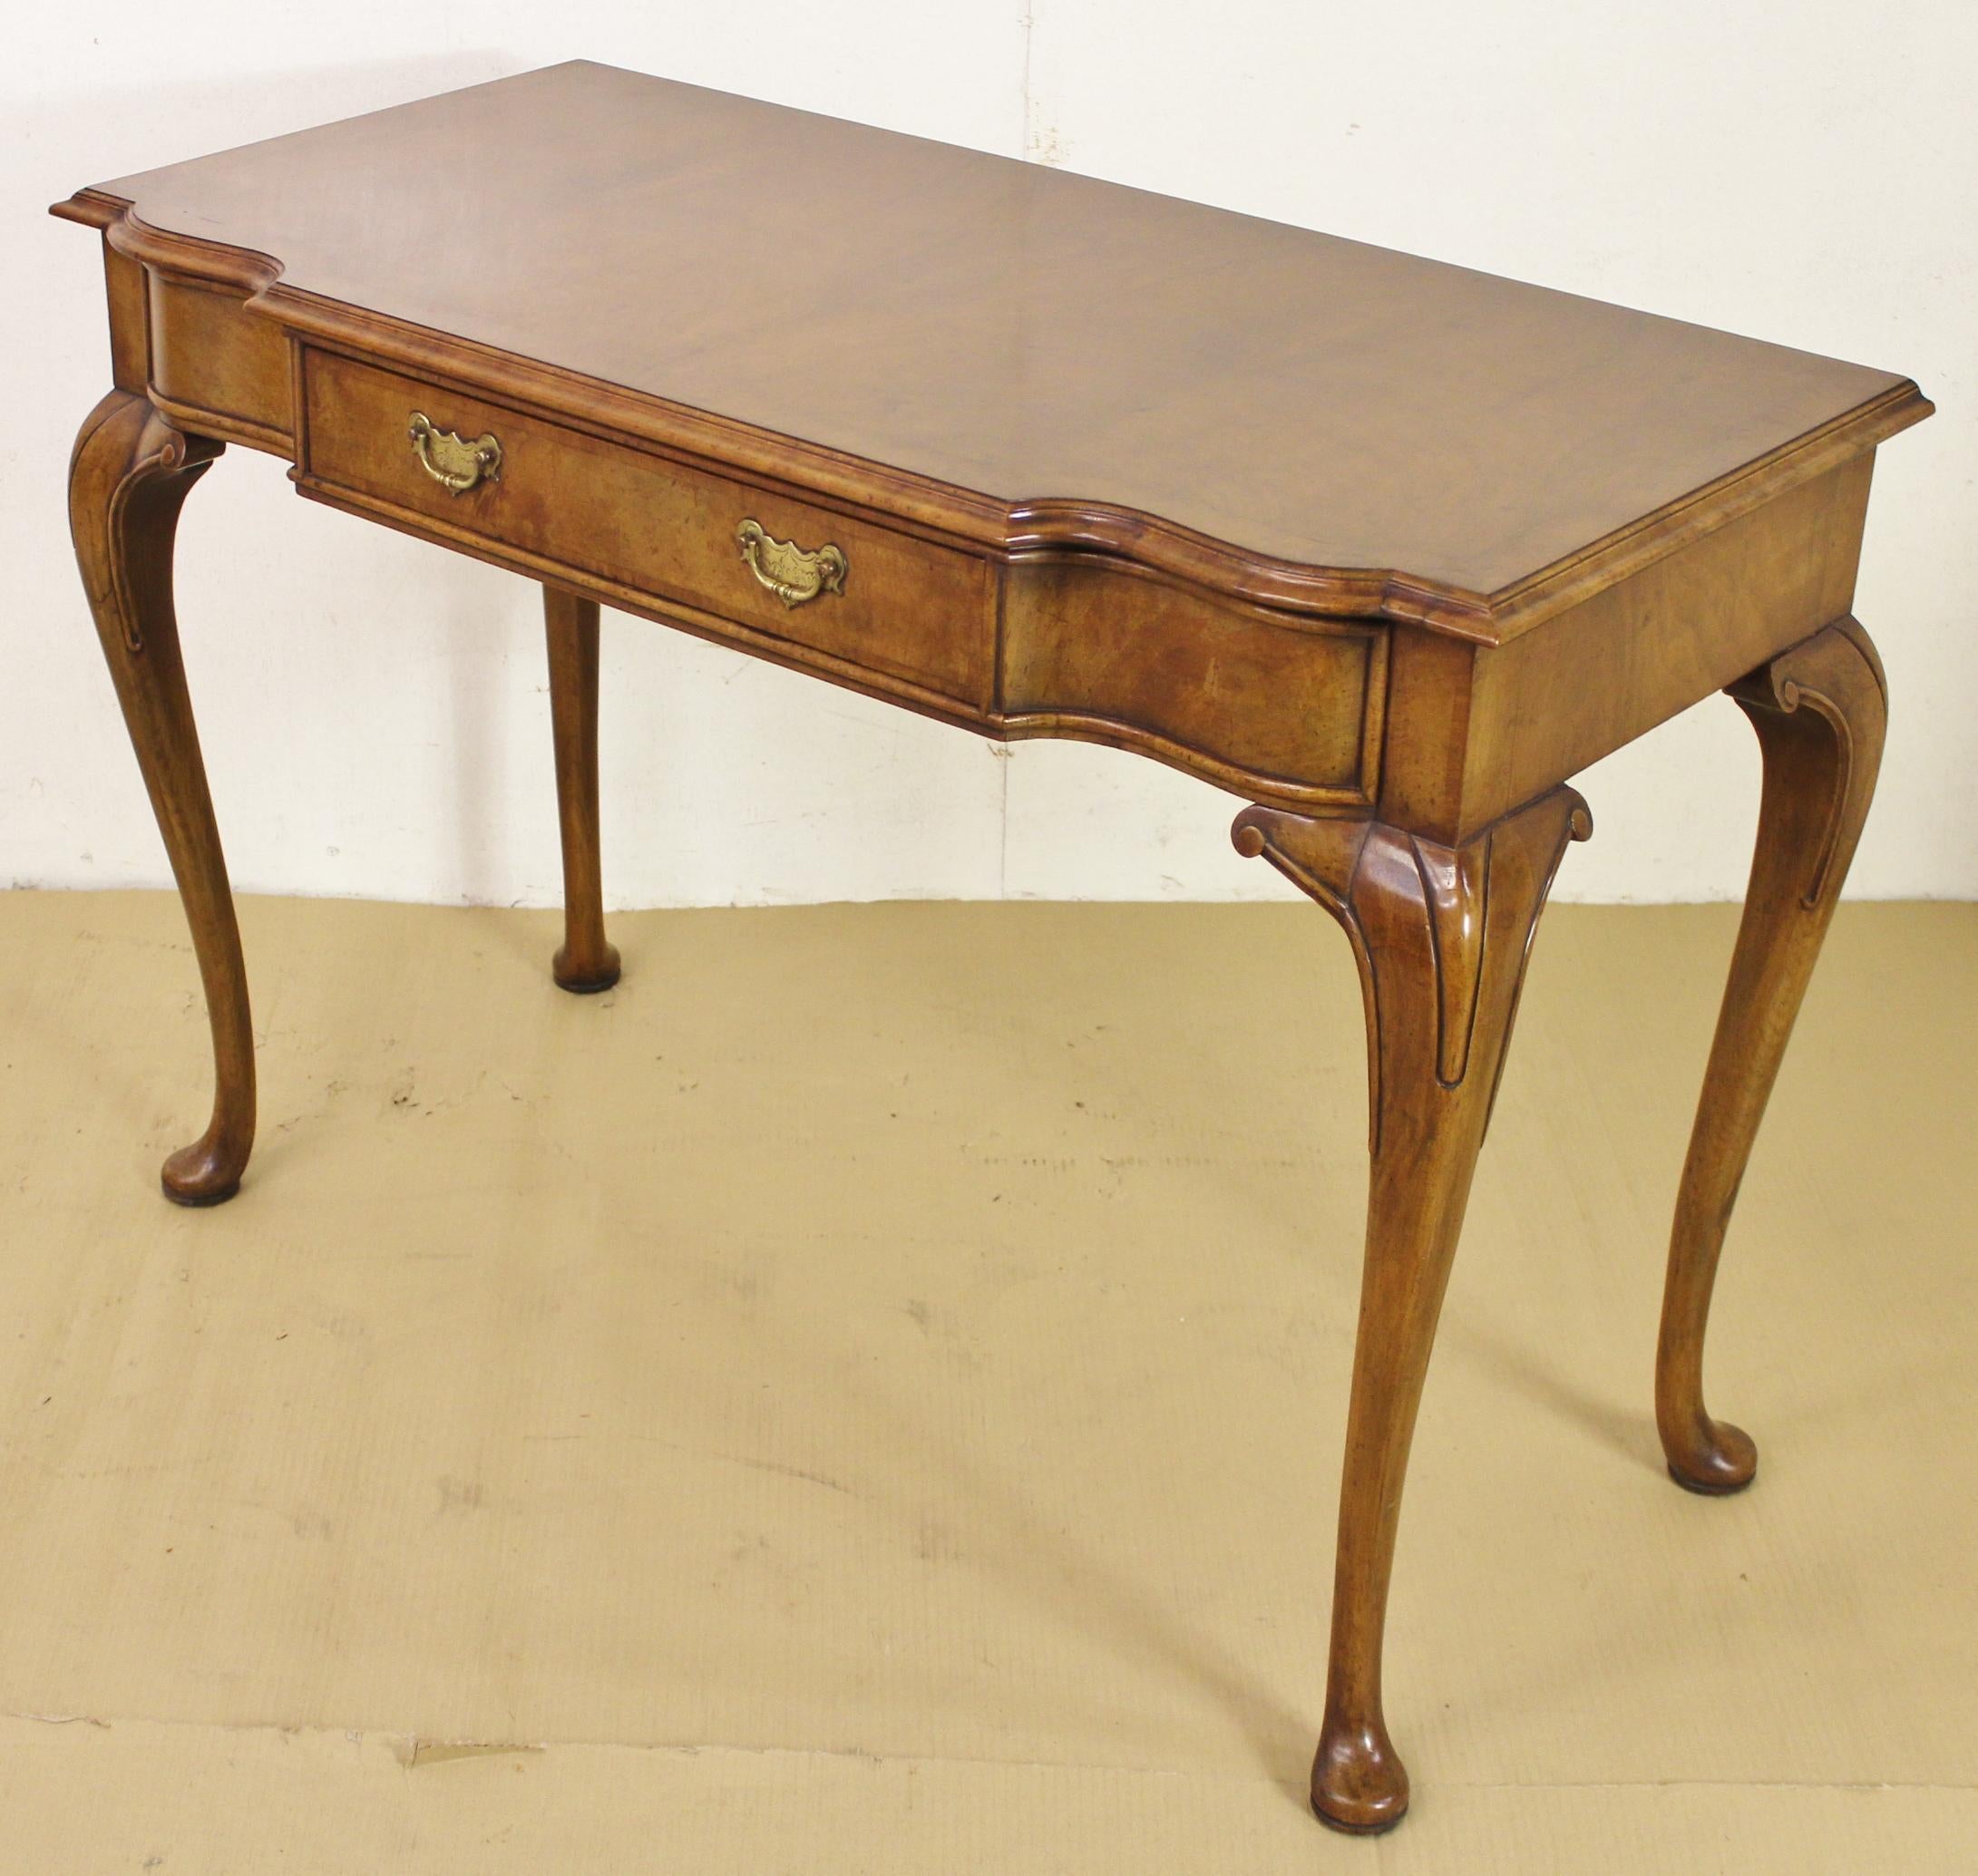 An excellent burr walnut console table in the Queen Anne style and of generous proportions. Very well constructed in solid walnut with attractive burr walnut veneers. The serpentine shaped top is cross banded and is surrounded with thumb-nail